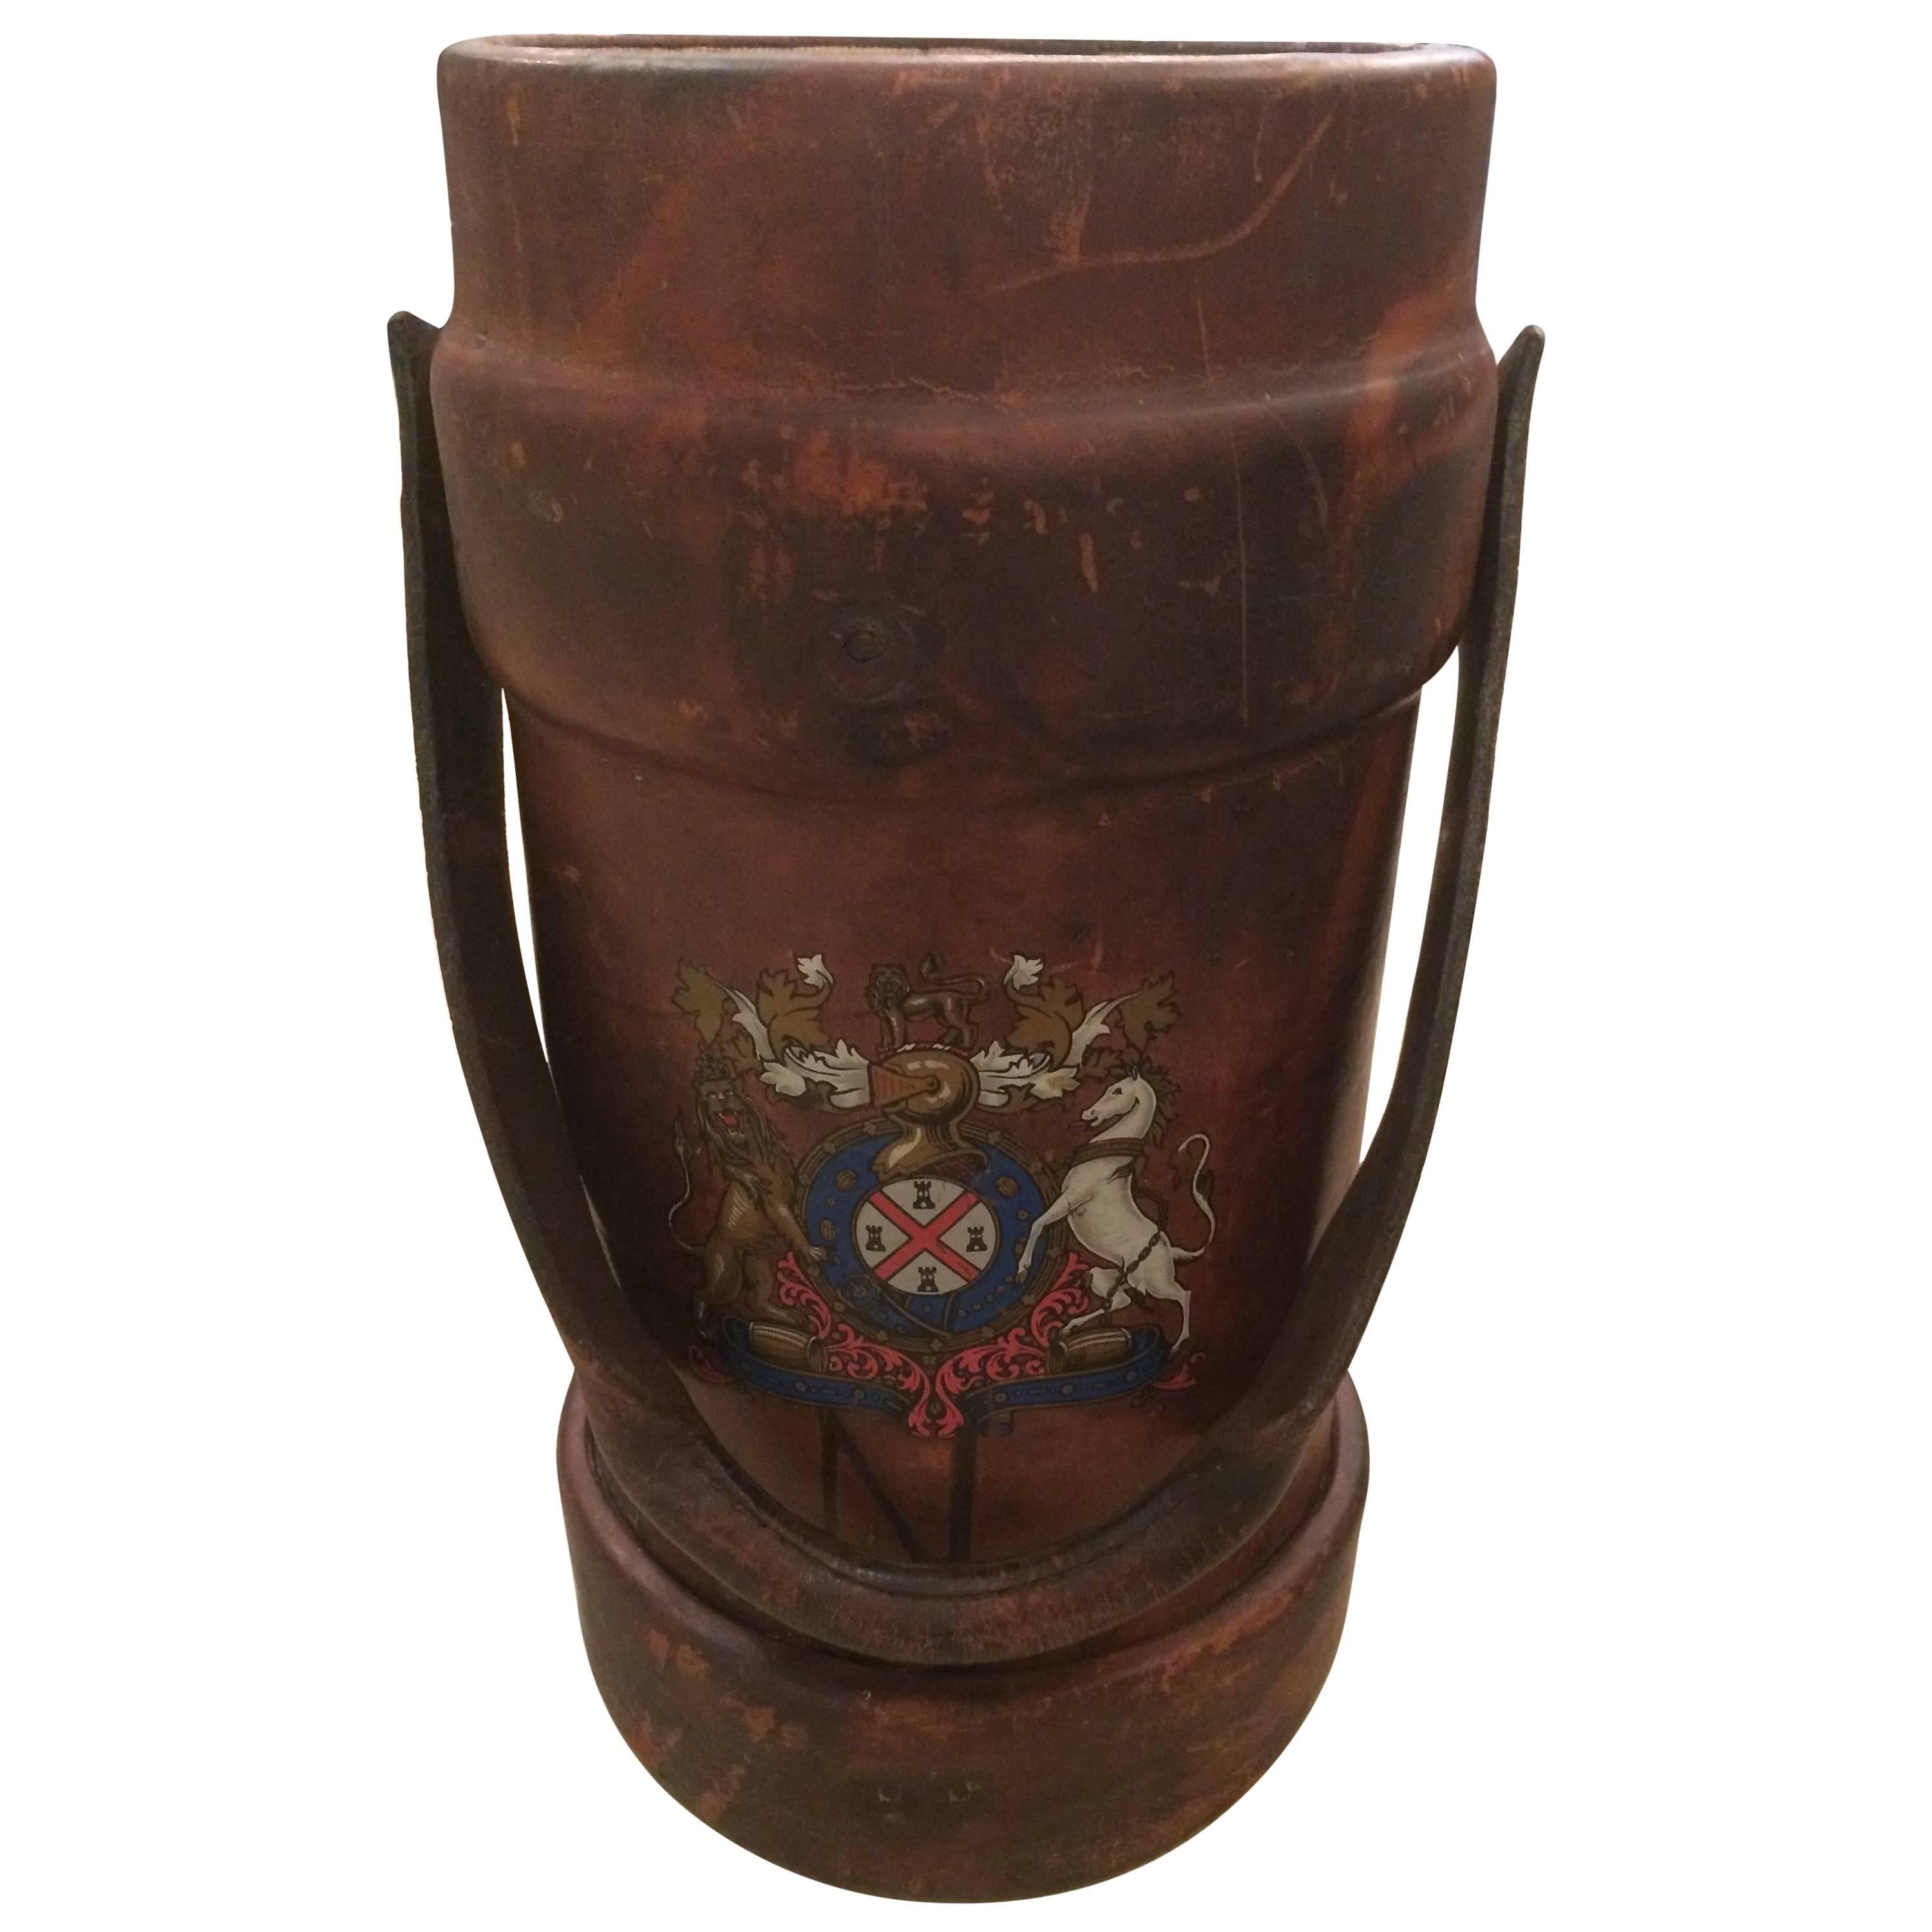 Masculine 19th Century Leather Cordite Case or Bucket with Hand-Painted Crest